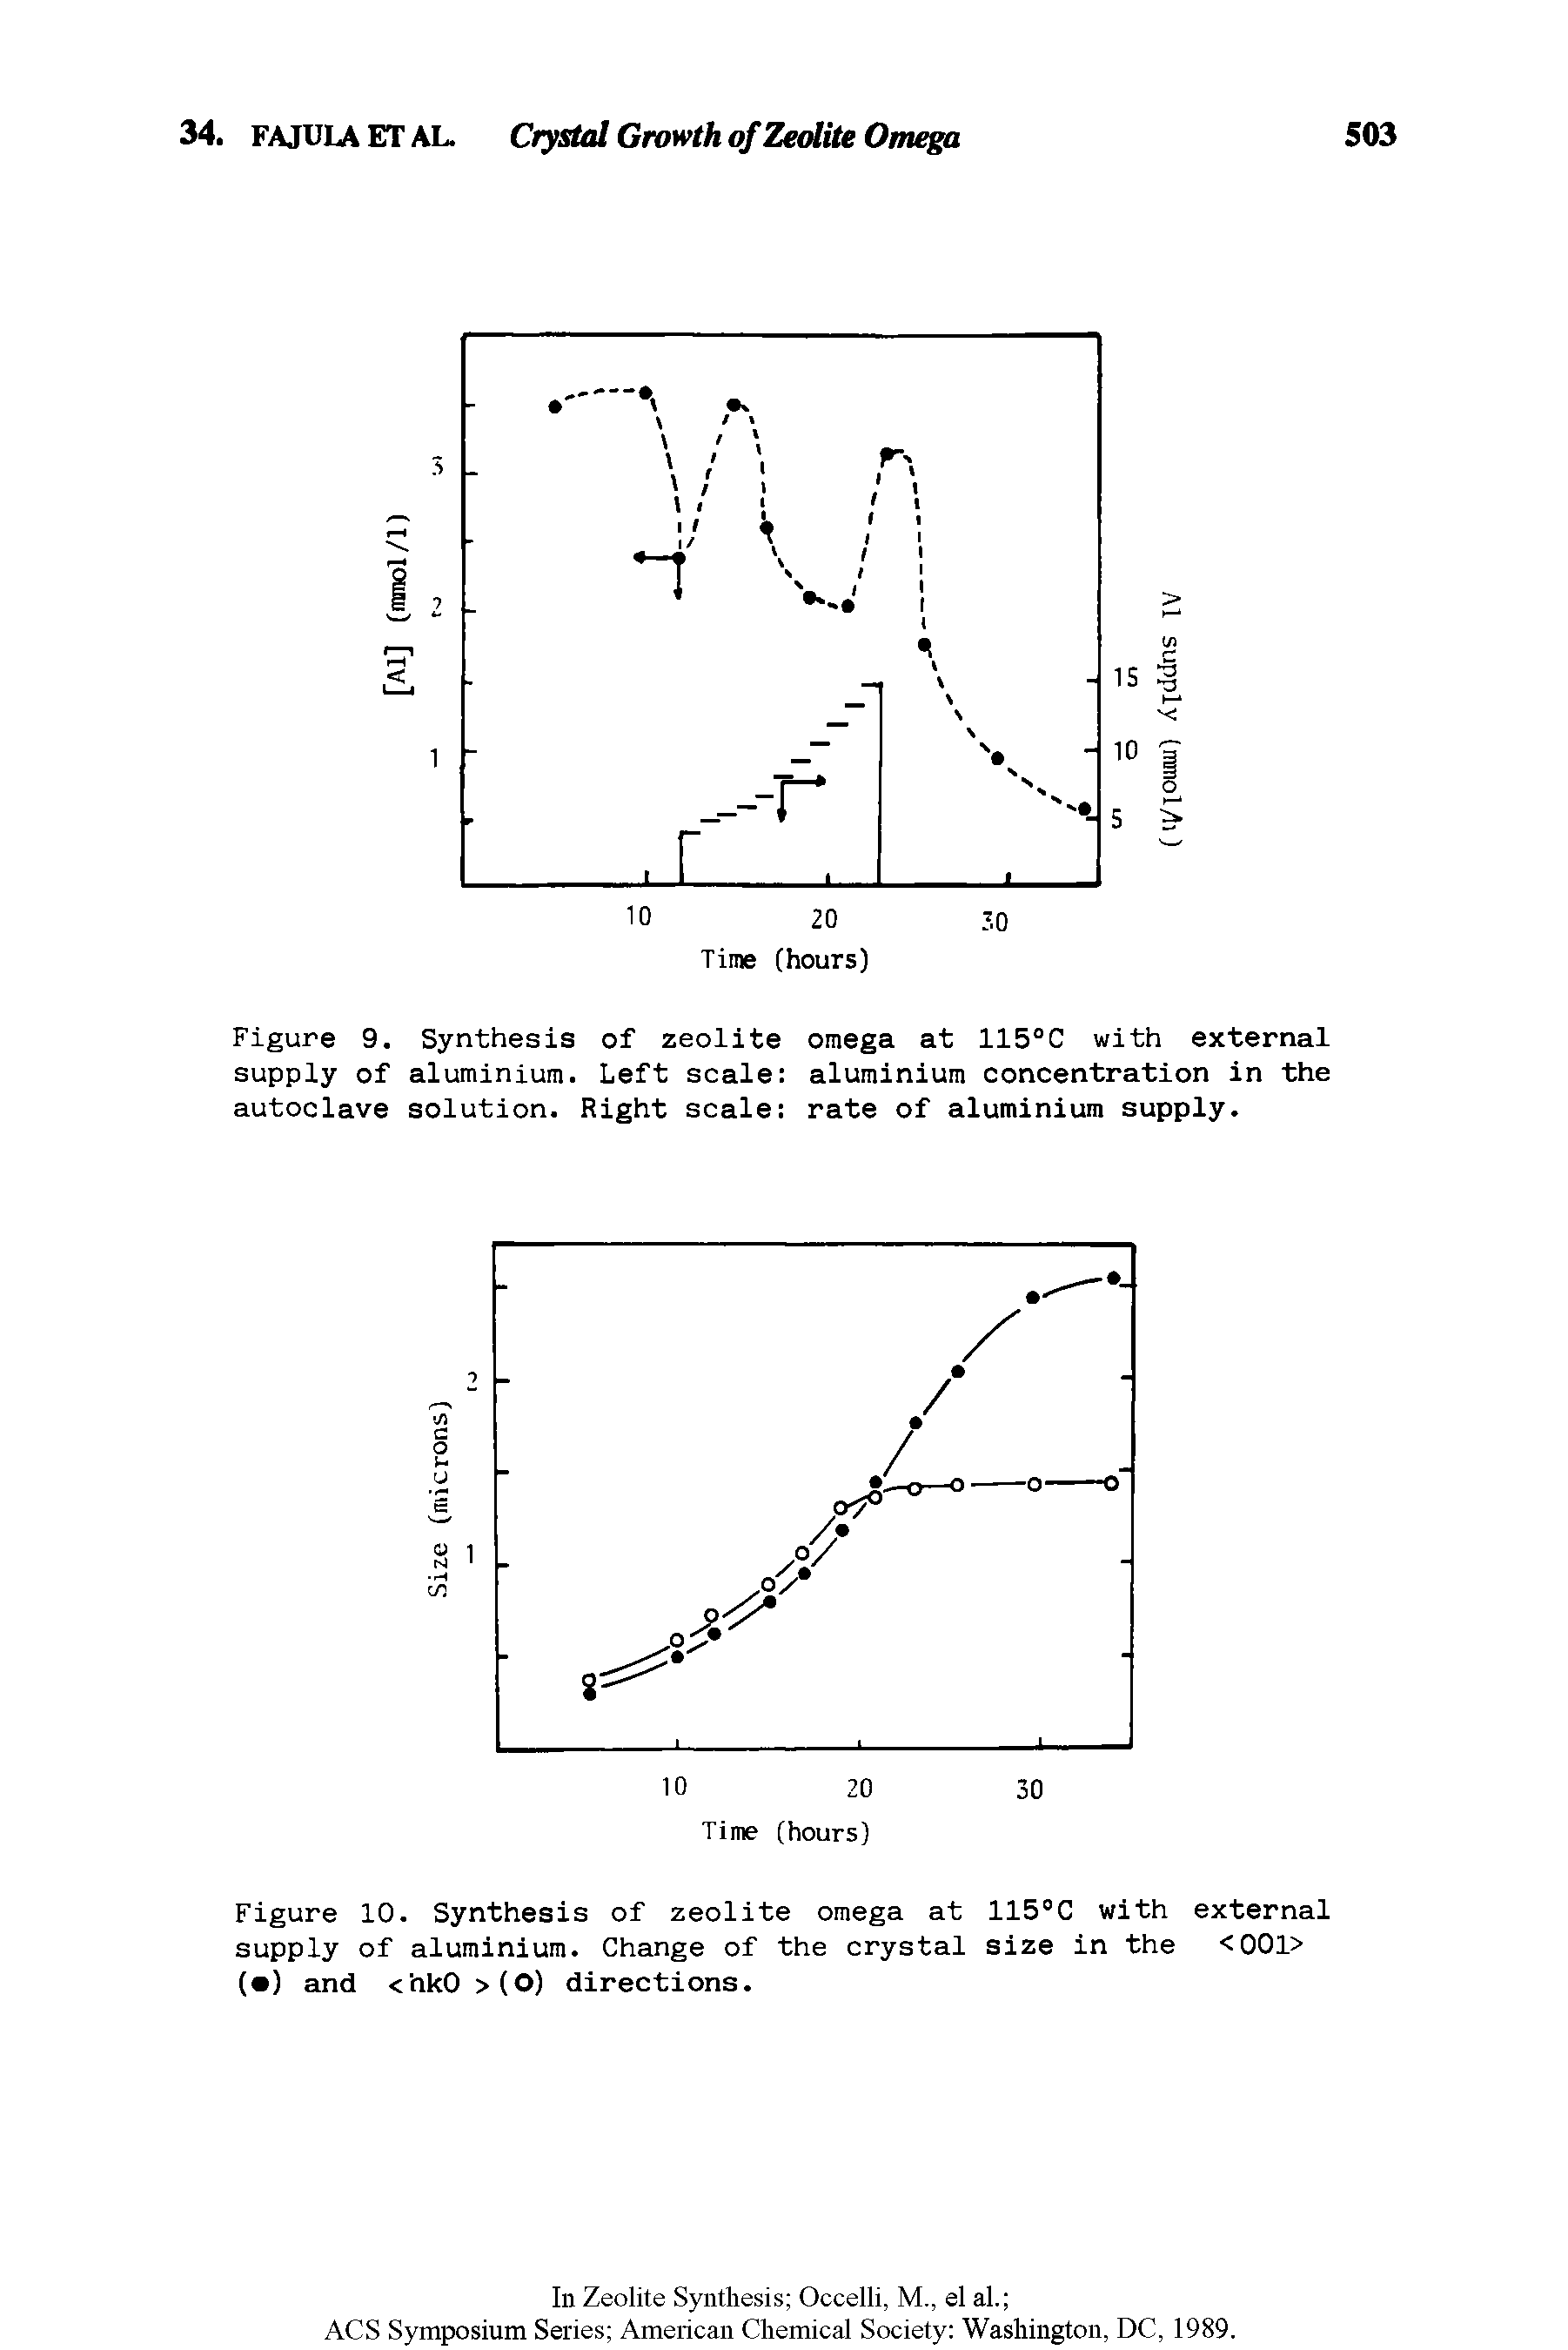 Figure 9. Synthesis of zeolite omega at 115°C with external supply of aluminium. Left scale aluminium concentration in the autoclave solution. Right scale rate of aluminium supply.